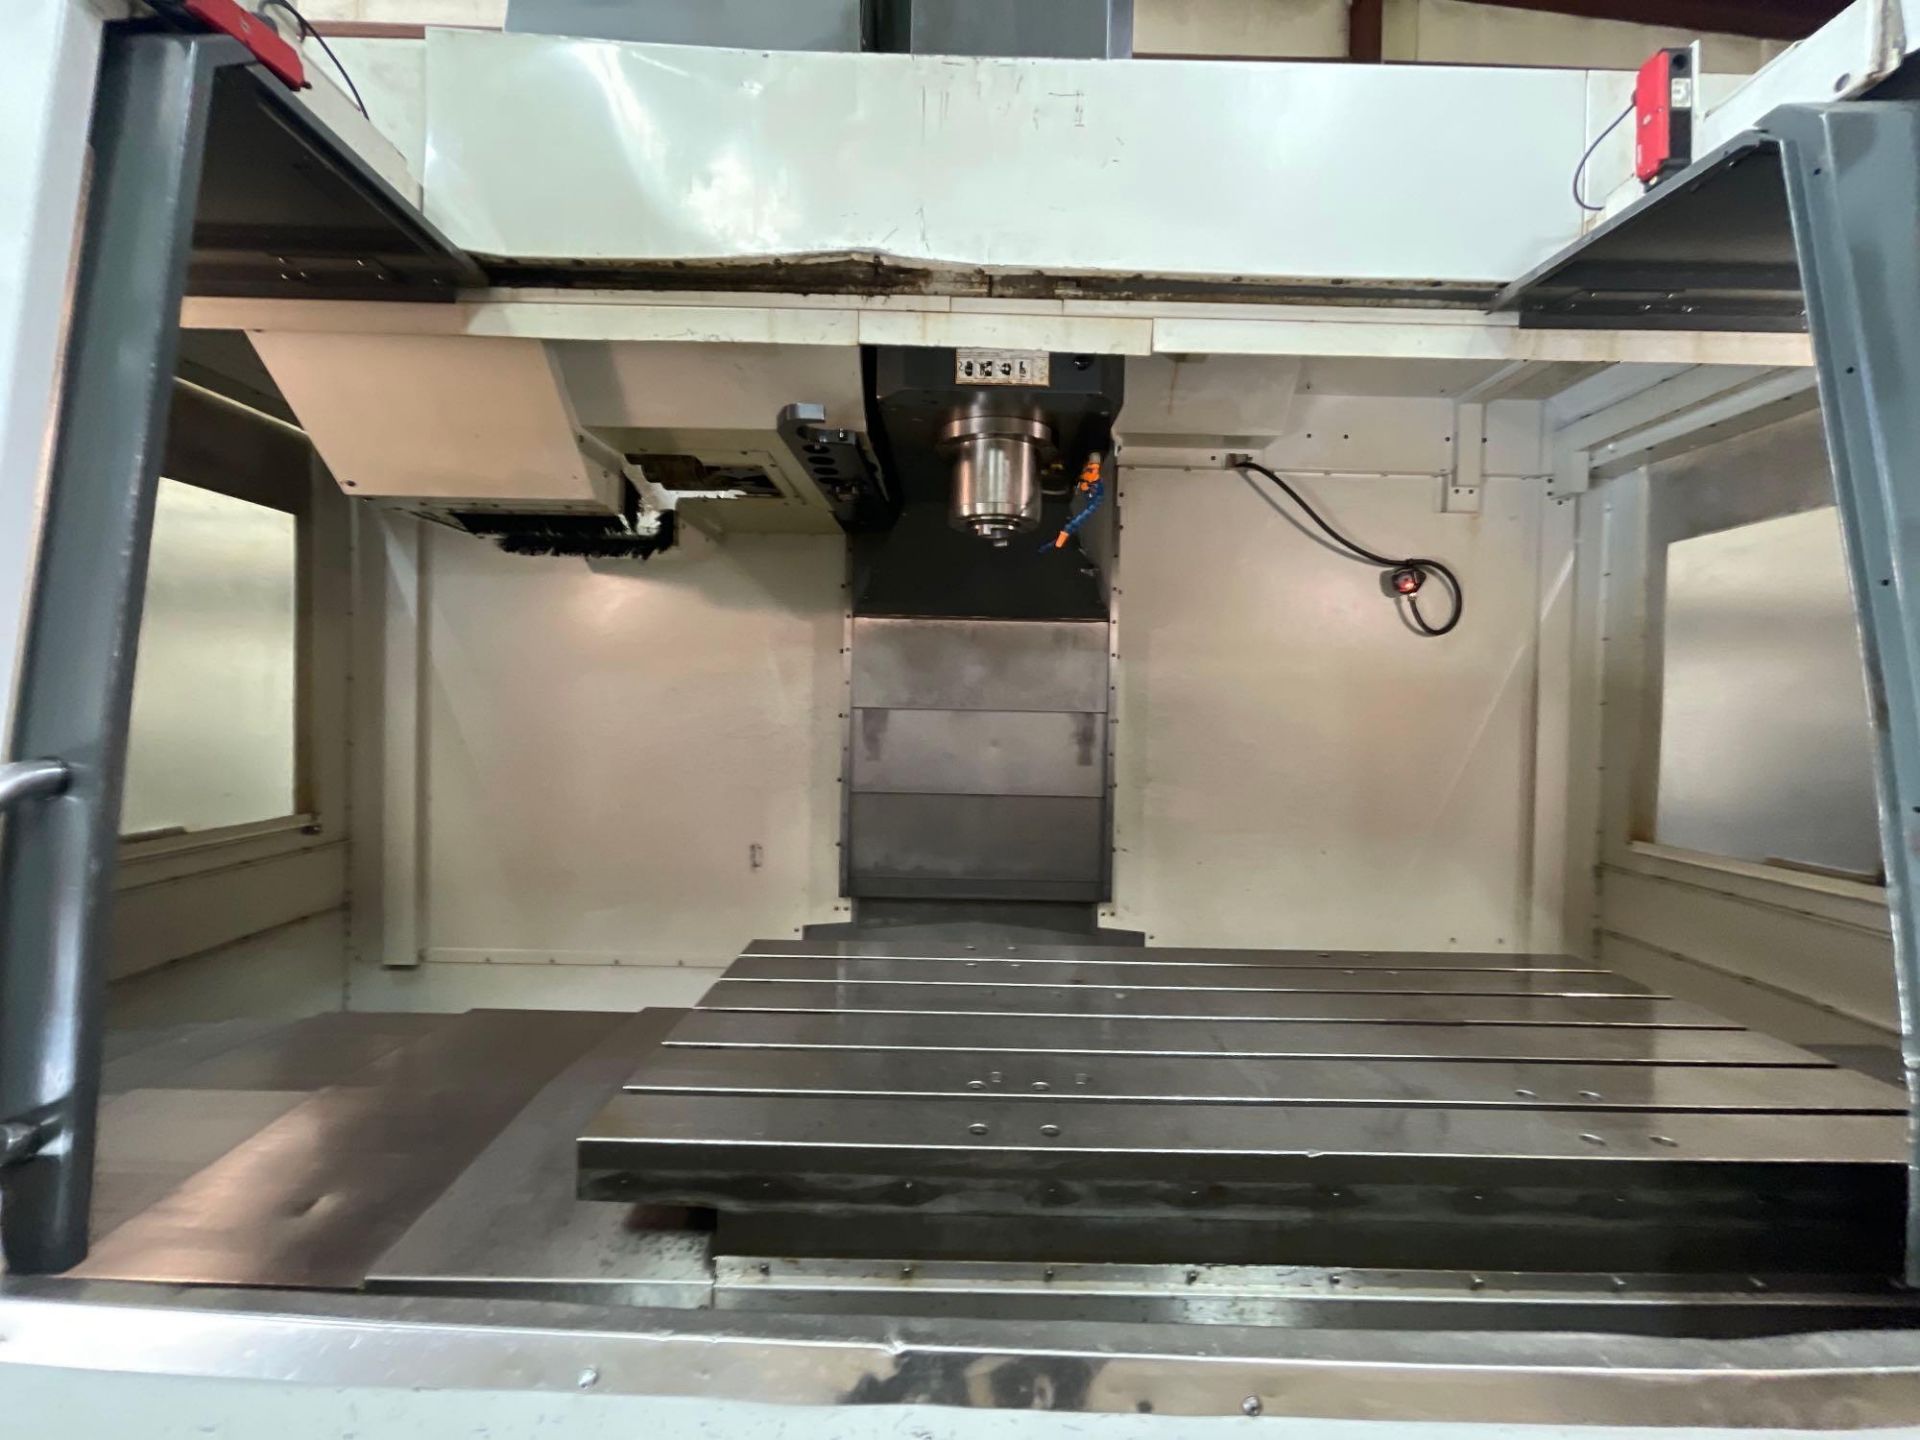 2012, Haas VF-6/50 CNC Vertical Machining Center - Image 25 of 36